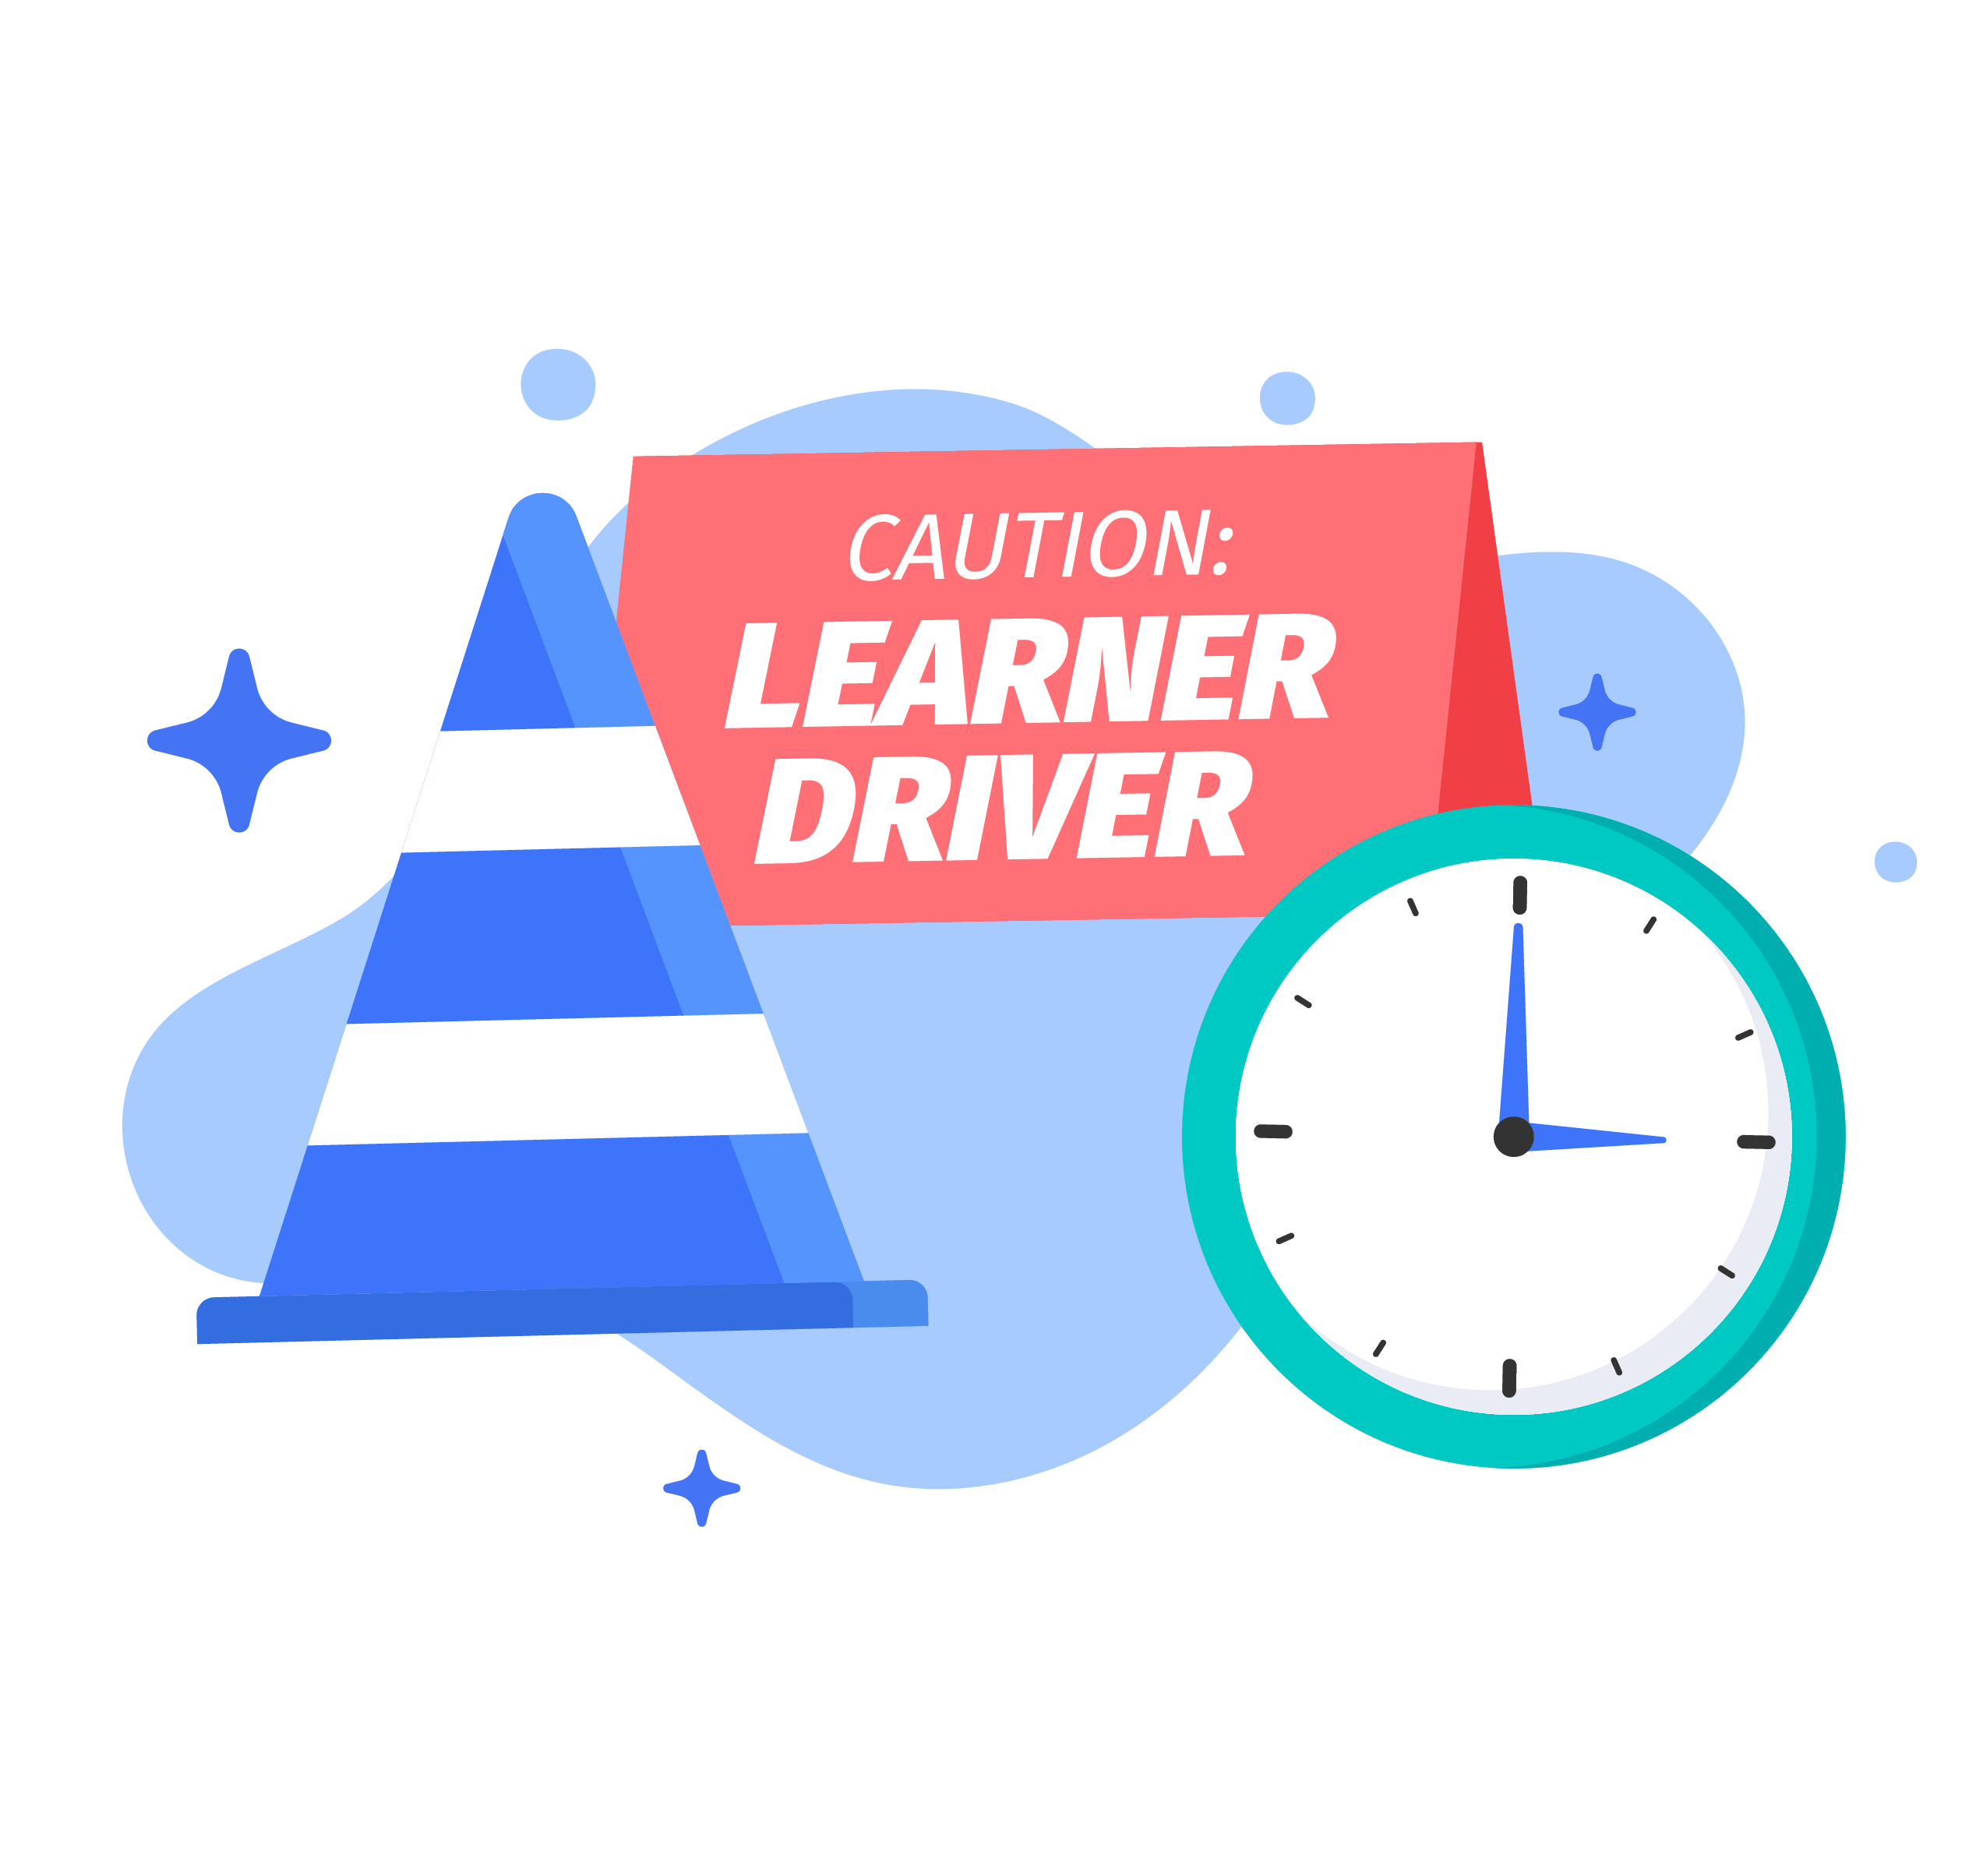 How Long Does it Take to Learn How to Drive?